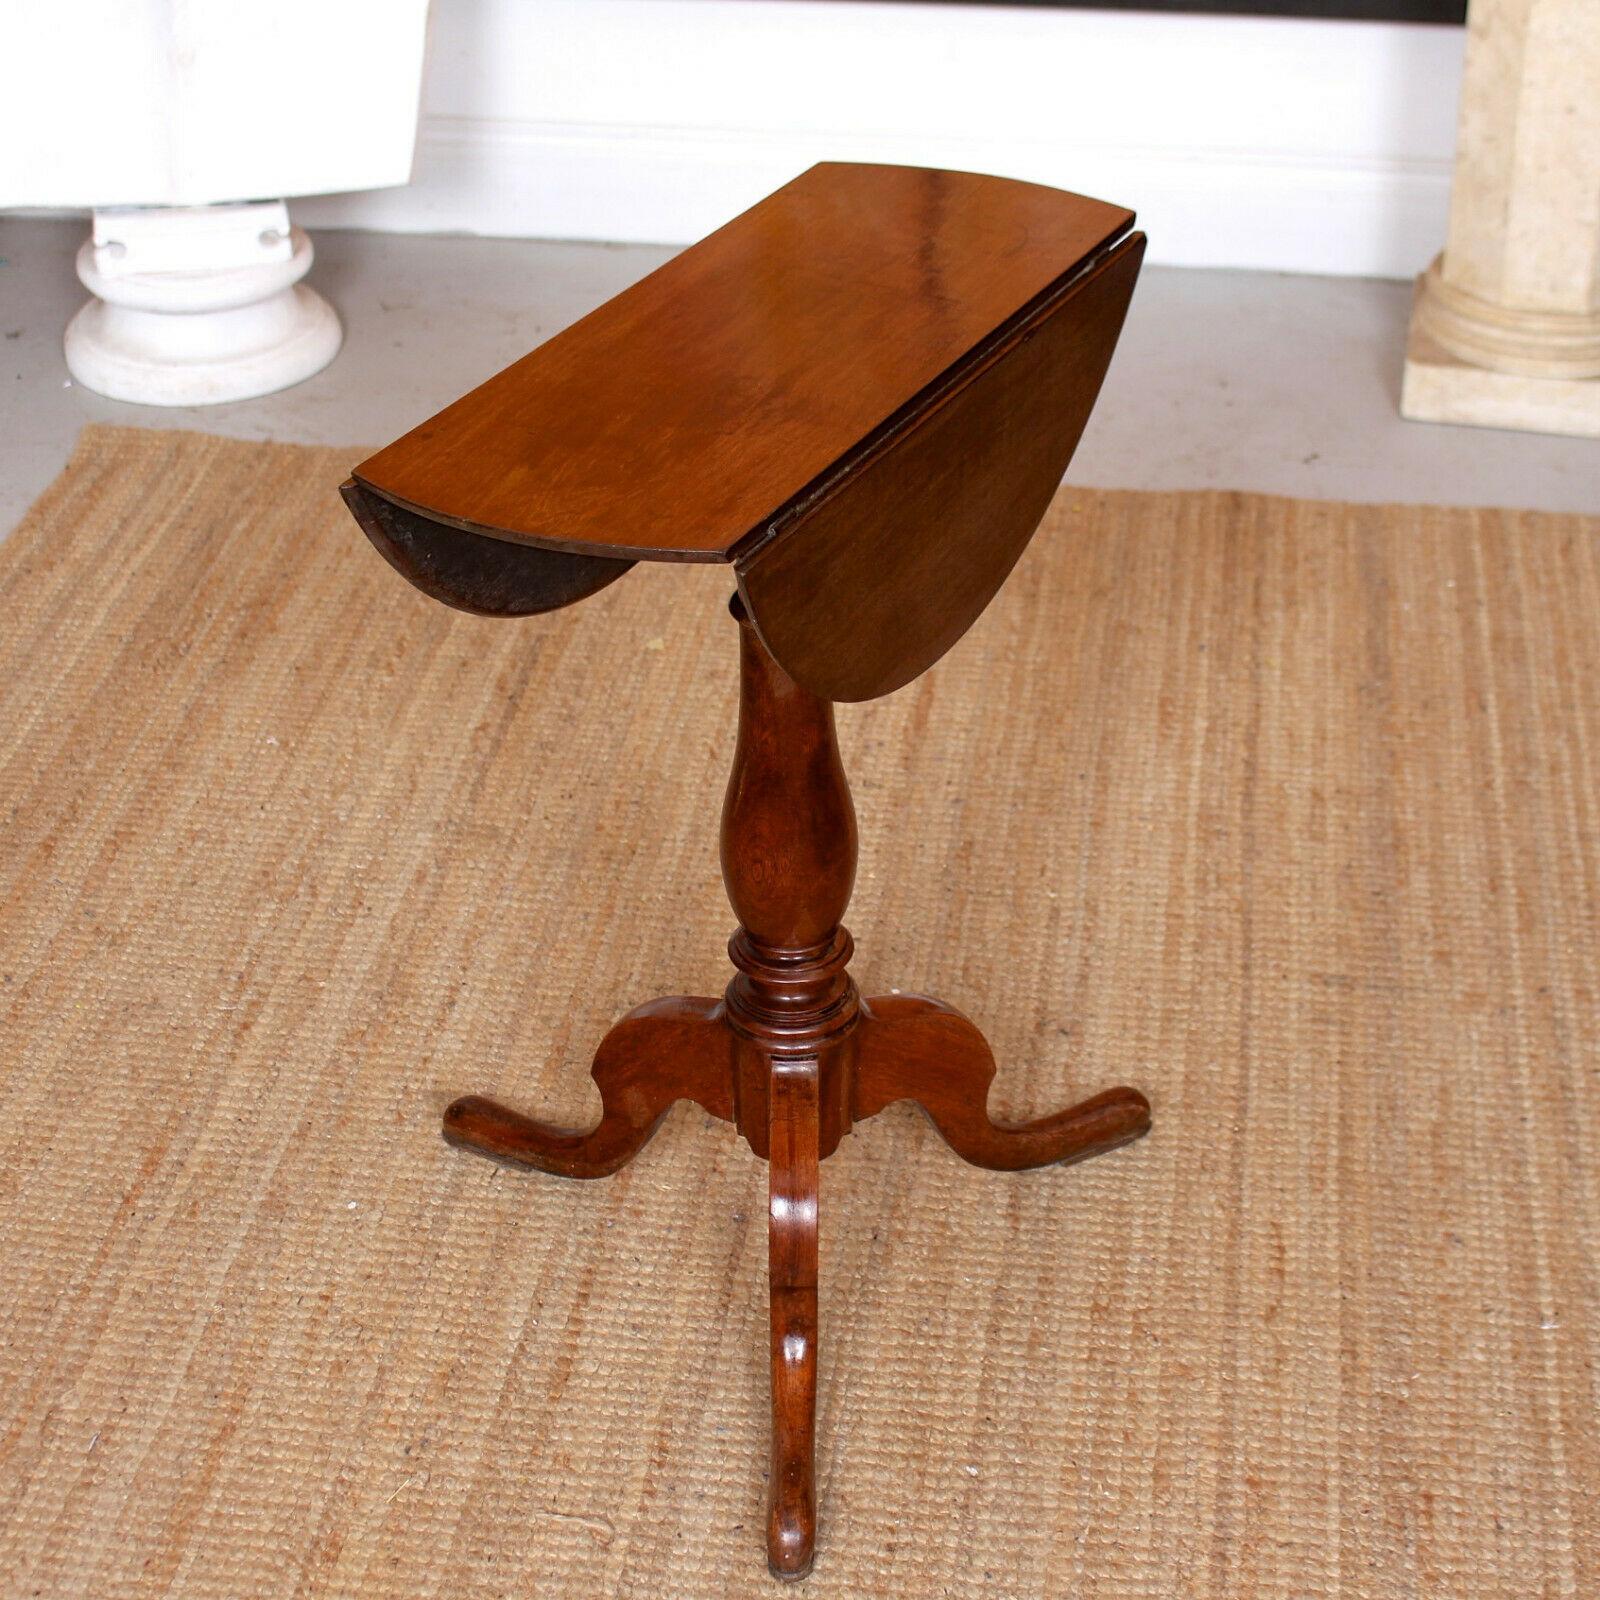 English Side Table Drop-Leaf Tripod 19th Century Mahogany Victorian Side Table For Sale 1